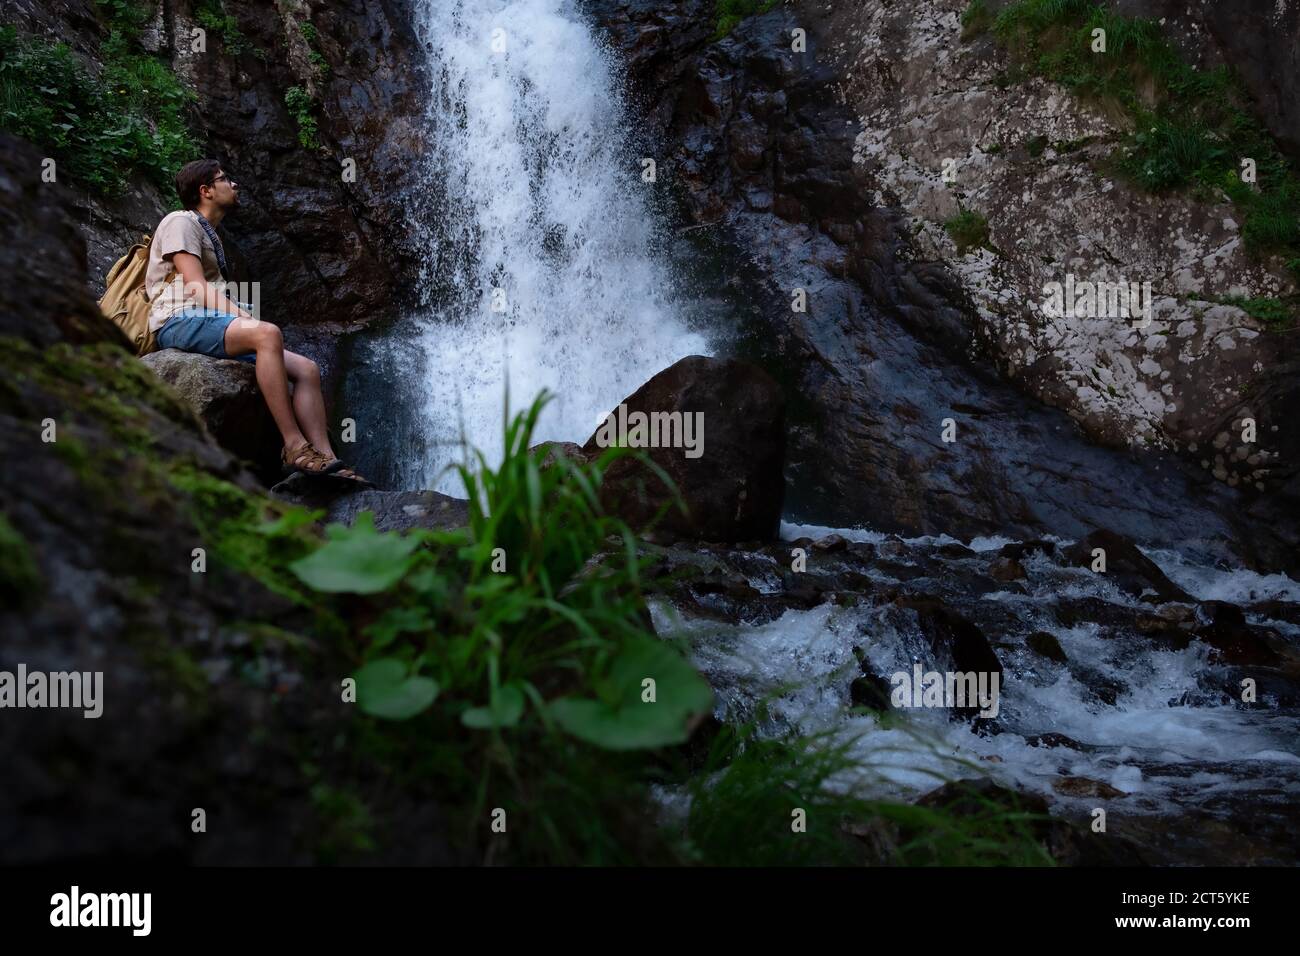 Hiker waalkinh with backpack looking at waterfall in park in beautiful nature landscape. Portrait of male adult back standing outdoor. Waterfall Shumk Stock Photo